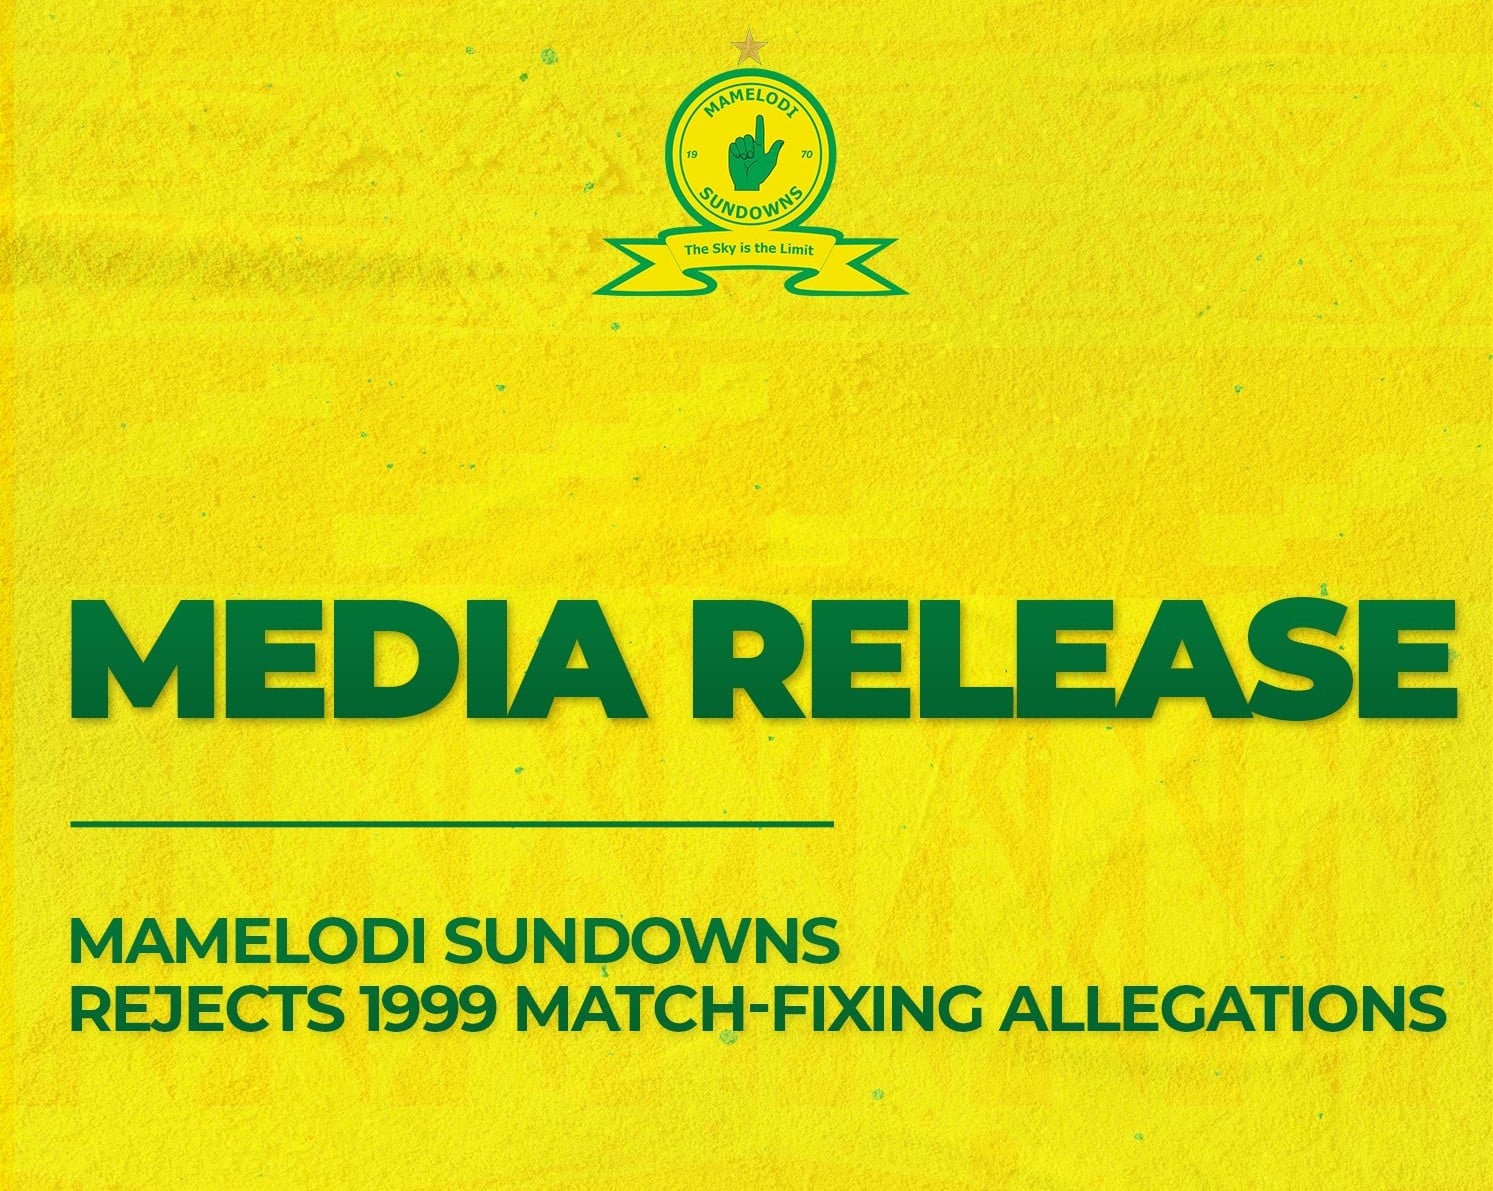 You are currently viewing Mamelodi Sundowns rejects 1999 match-fixing allegations